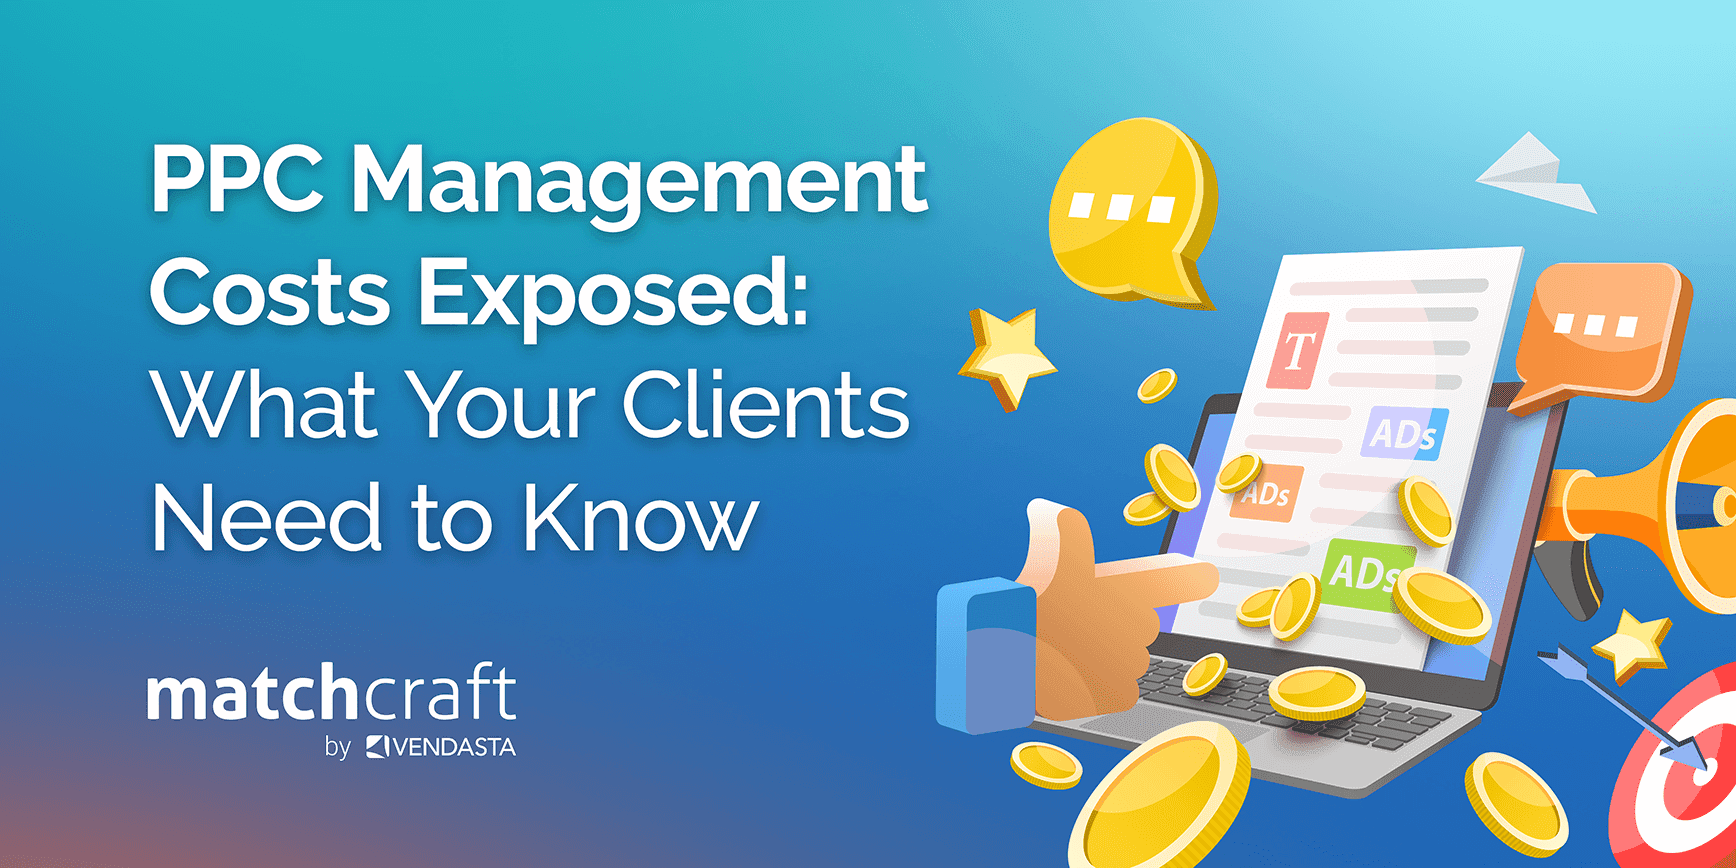 PPC Management Costs Exposed: What Your Clients Need to Know